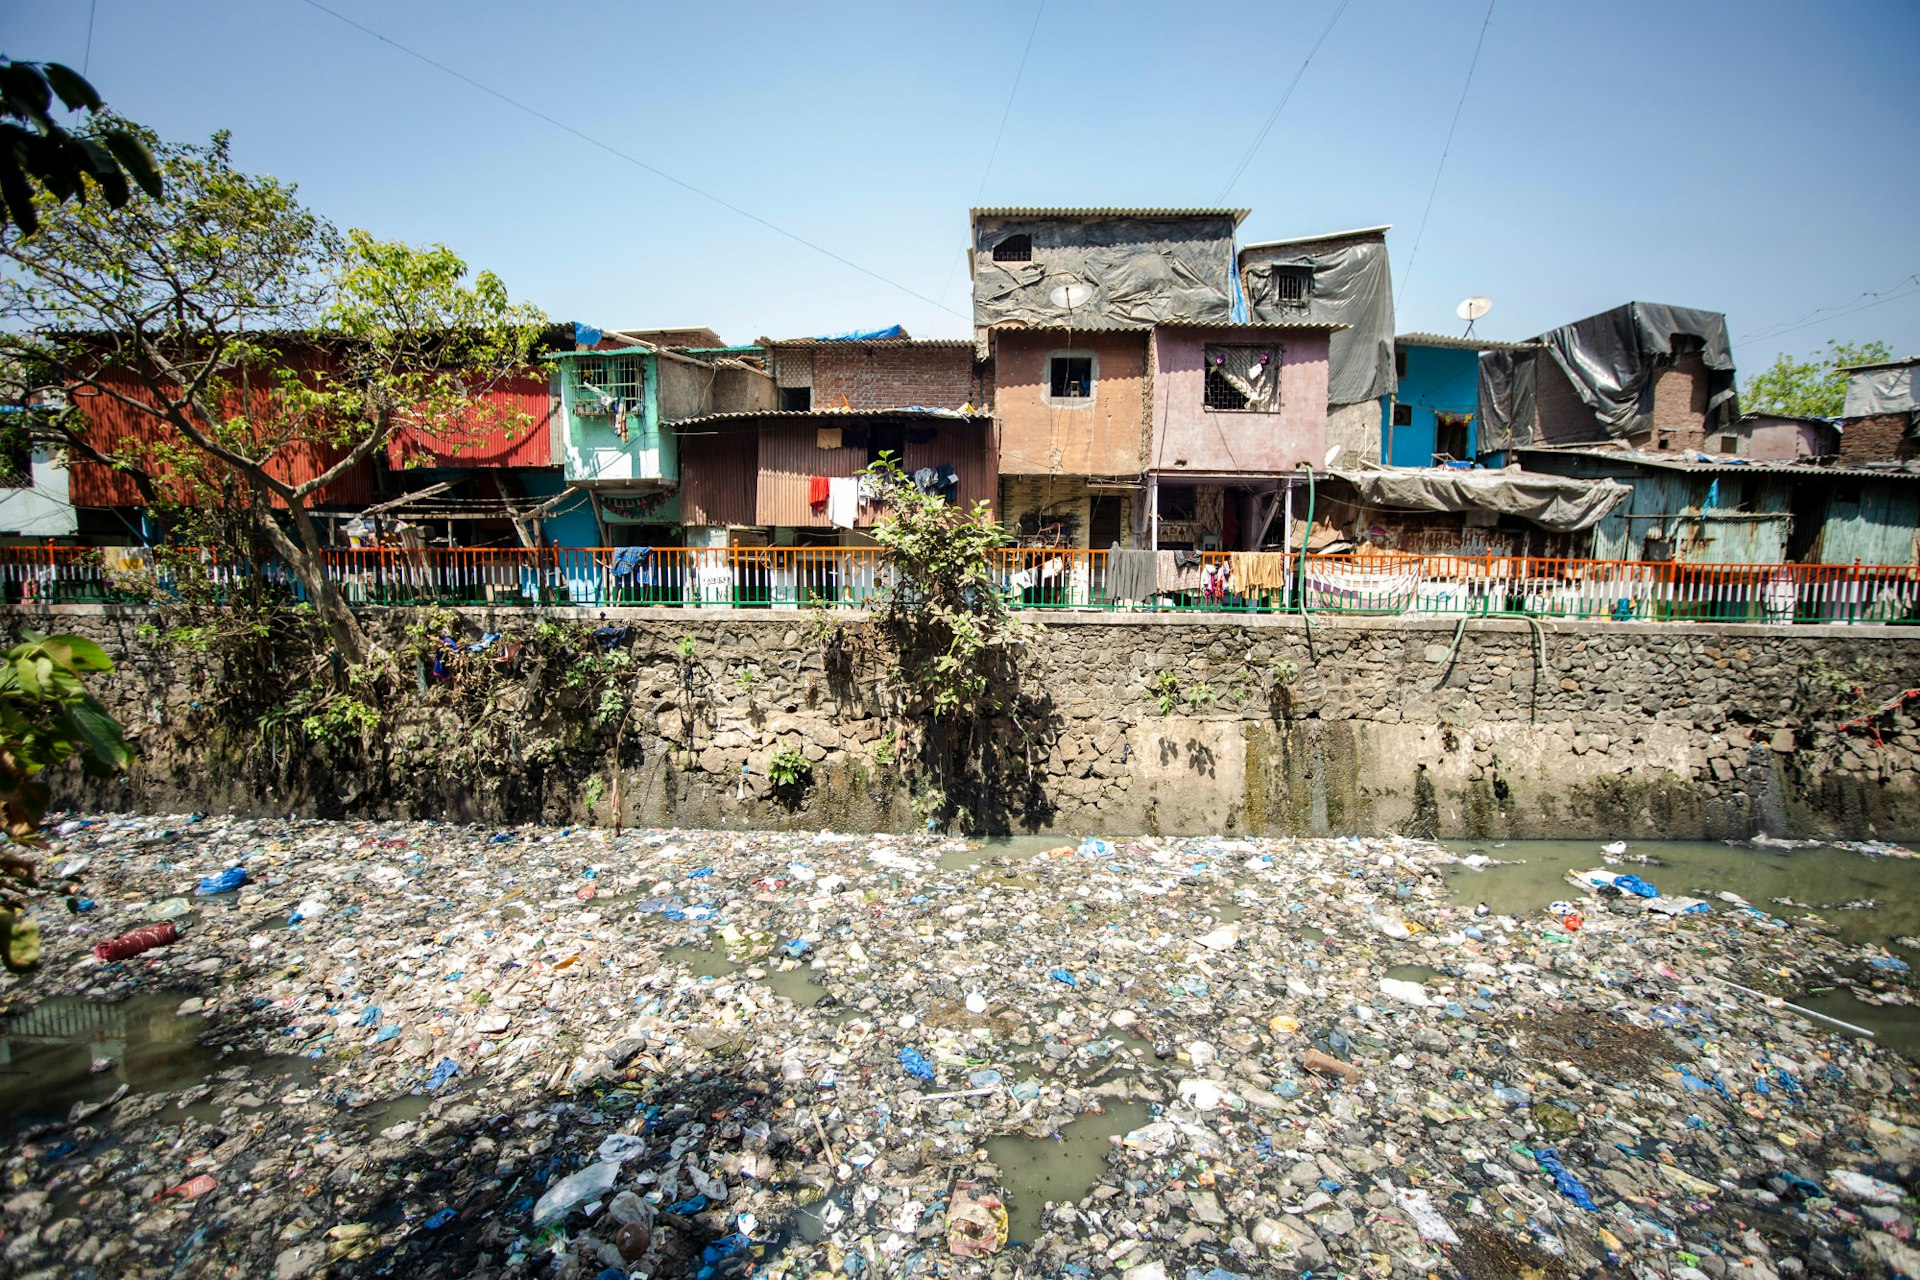 Slums sit on the edge of an urban river polluted with waste in Dharavi slums, Mumbai.